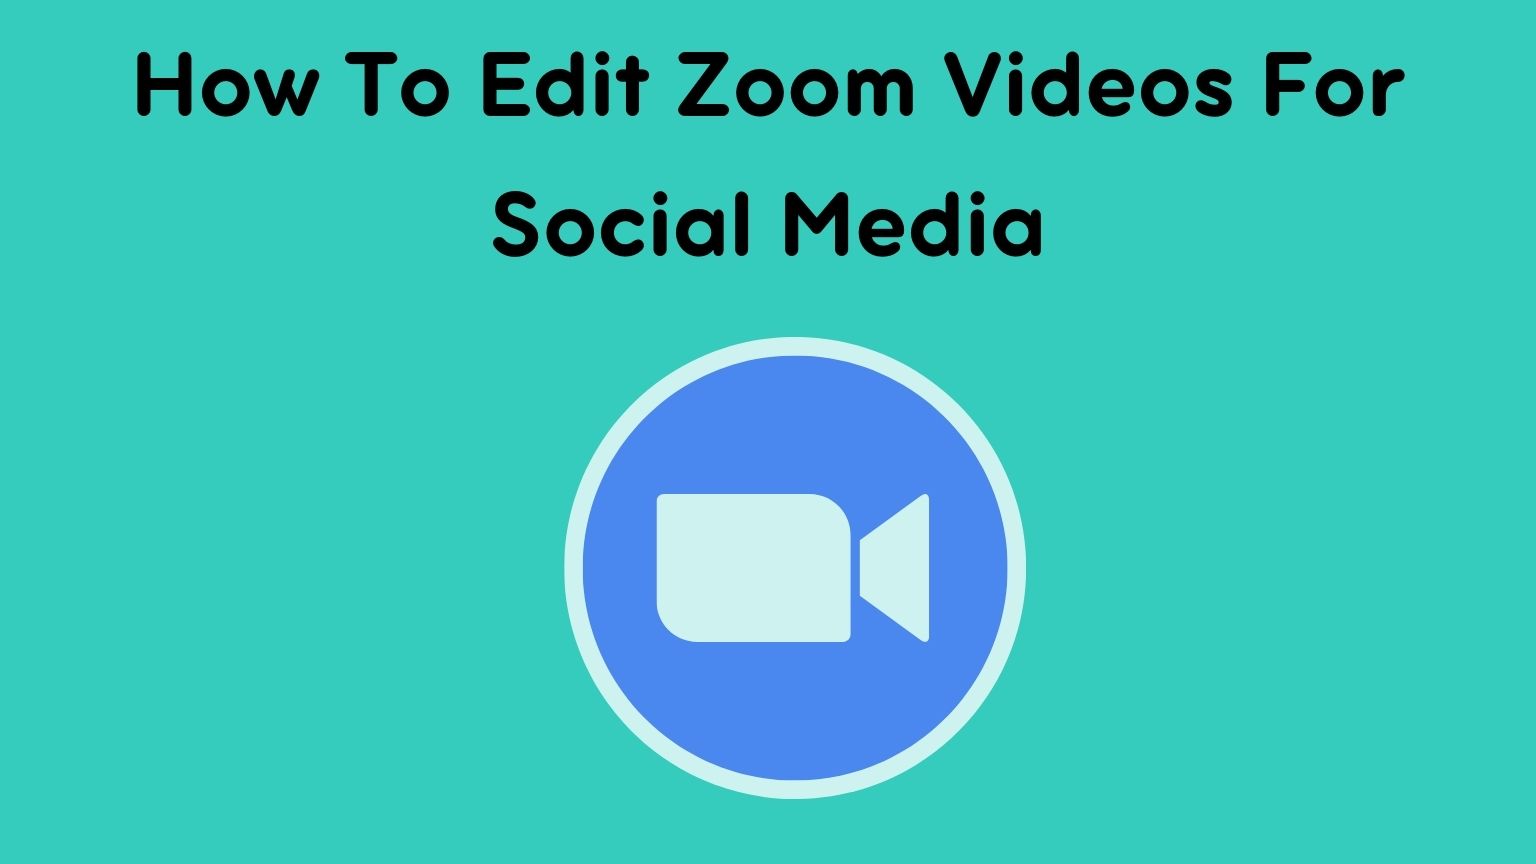 How To Edit Zoom Videos For Social Media